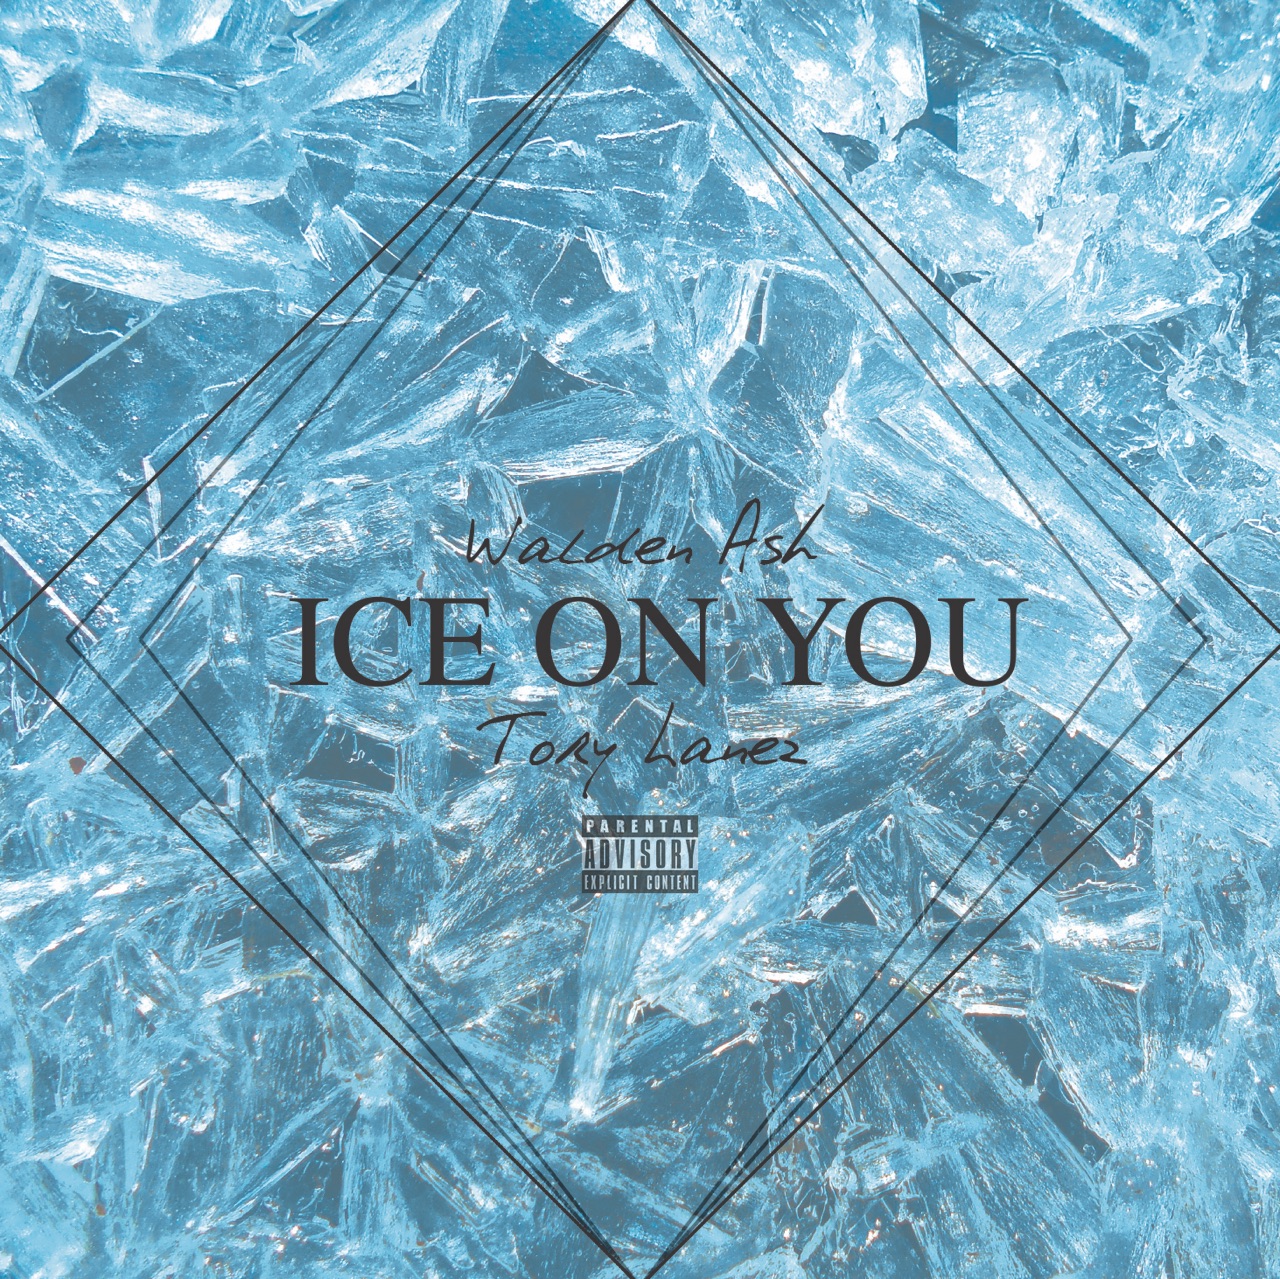 Walden Ash Feat. Tory Lanez – Ice on You [VMG Approved]